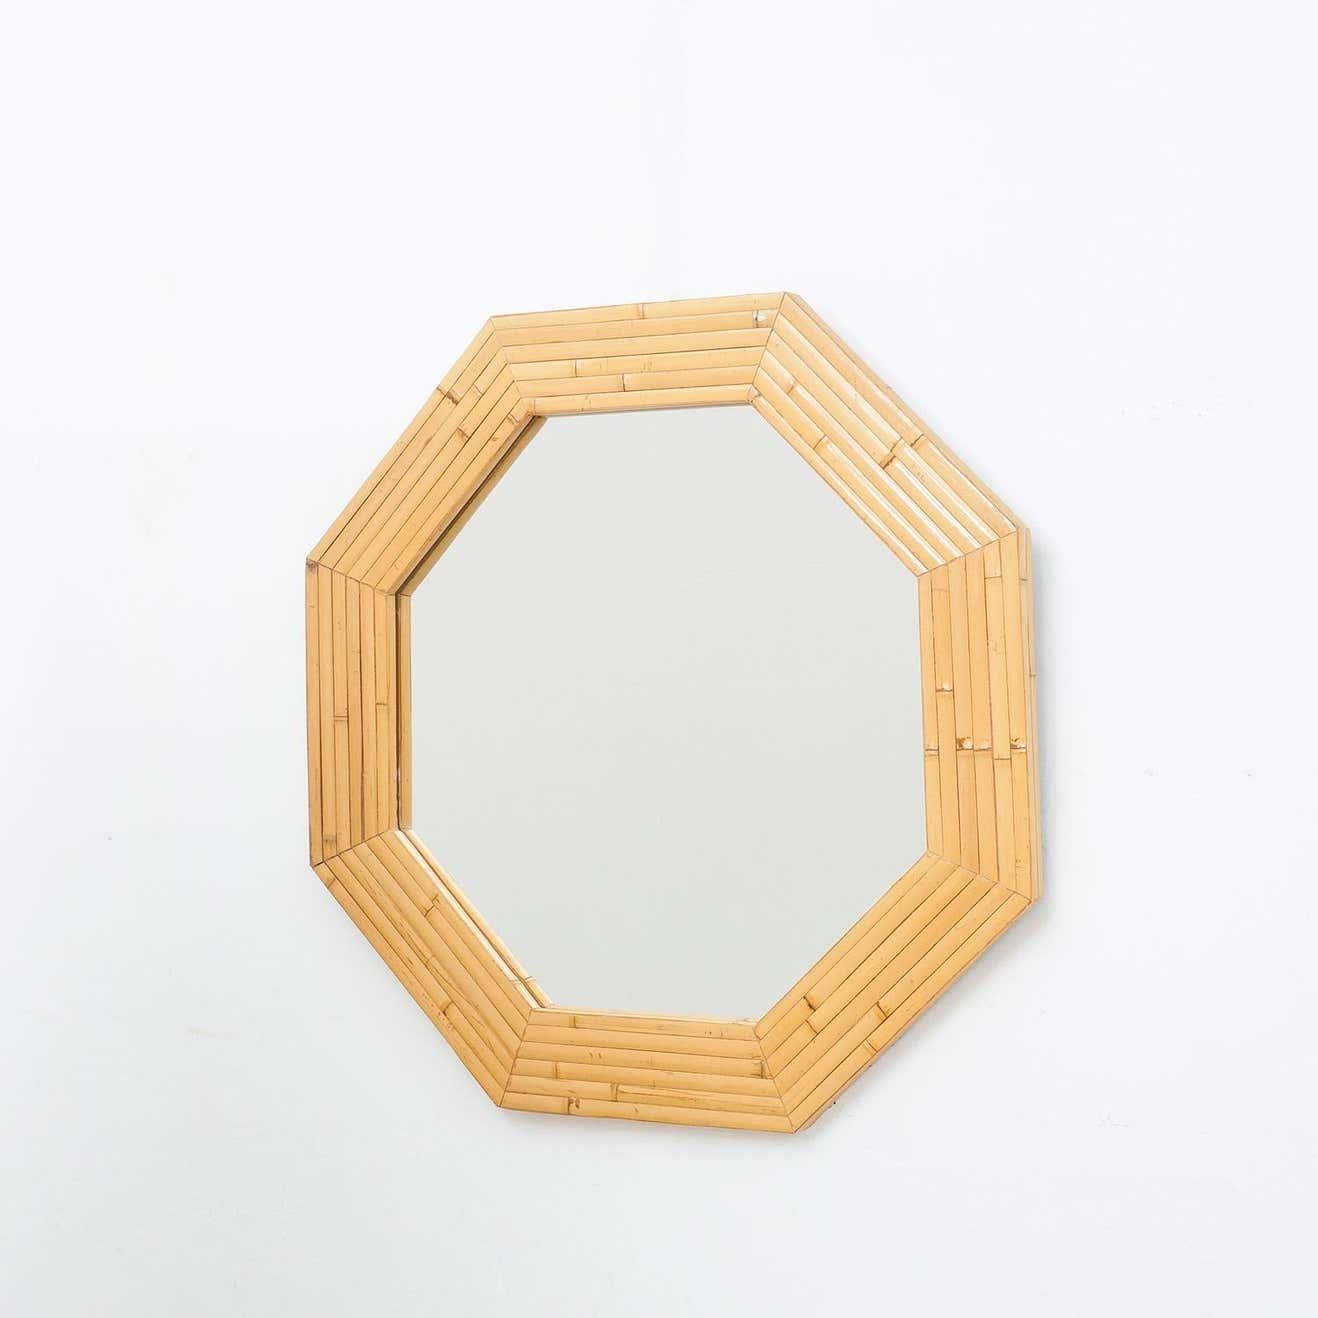 Mid-Century Modern bamboo mirror, circa 1960
Traditionally manufactured in French.
By unknown designer.

In original condition with minor wear consistent of age and use, preserving a beautiful patina.

Material:
Bamboo

Dimensions:
D 3 cm